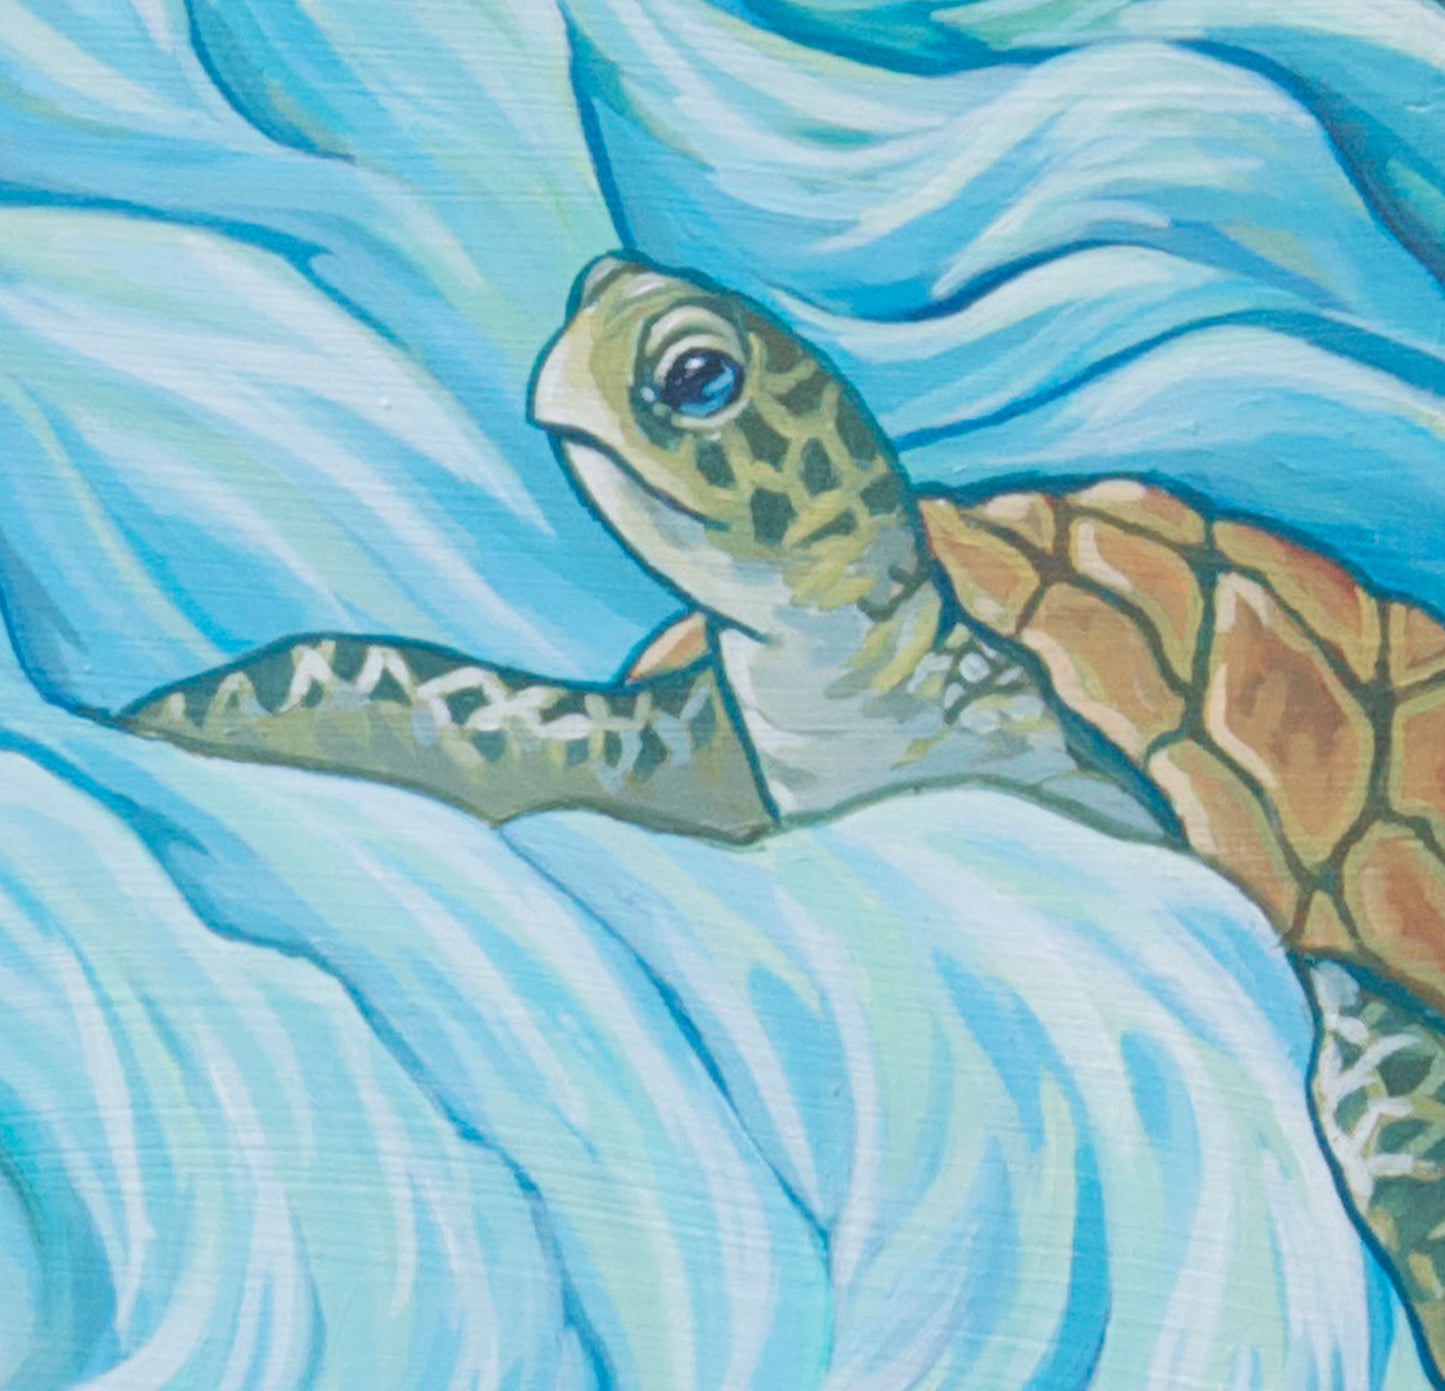 Nirvana- a turtle swims in the surf art print